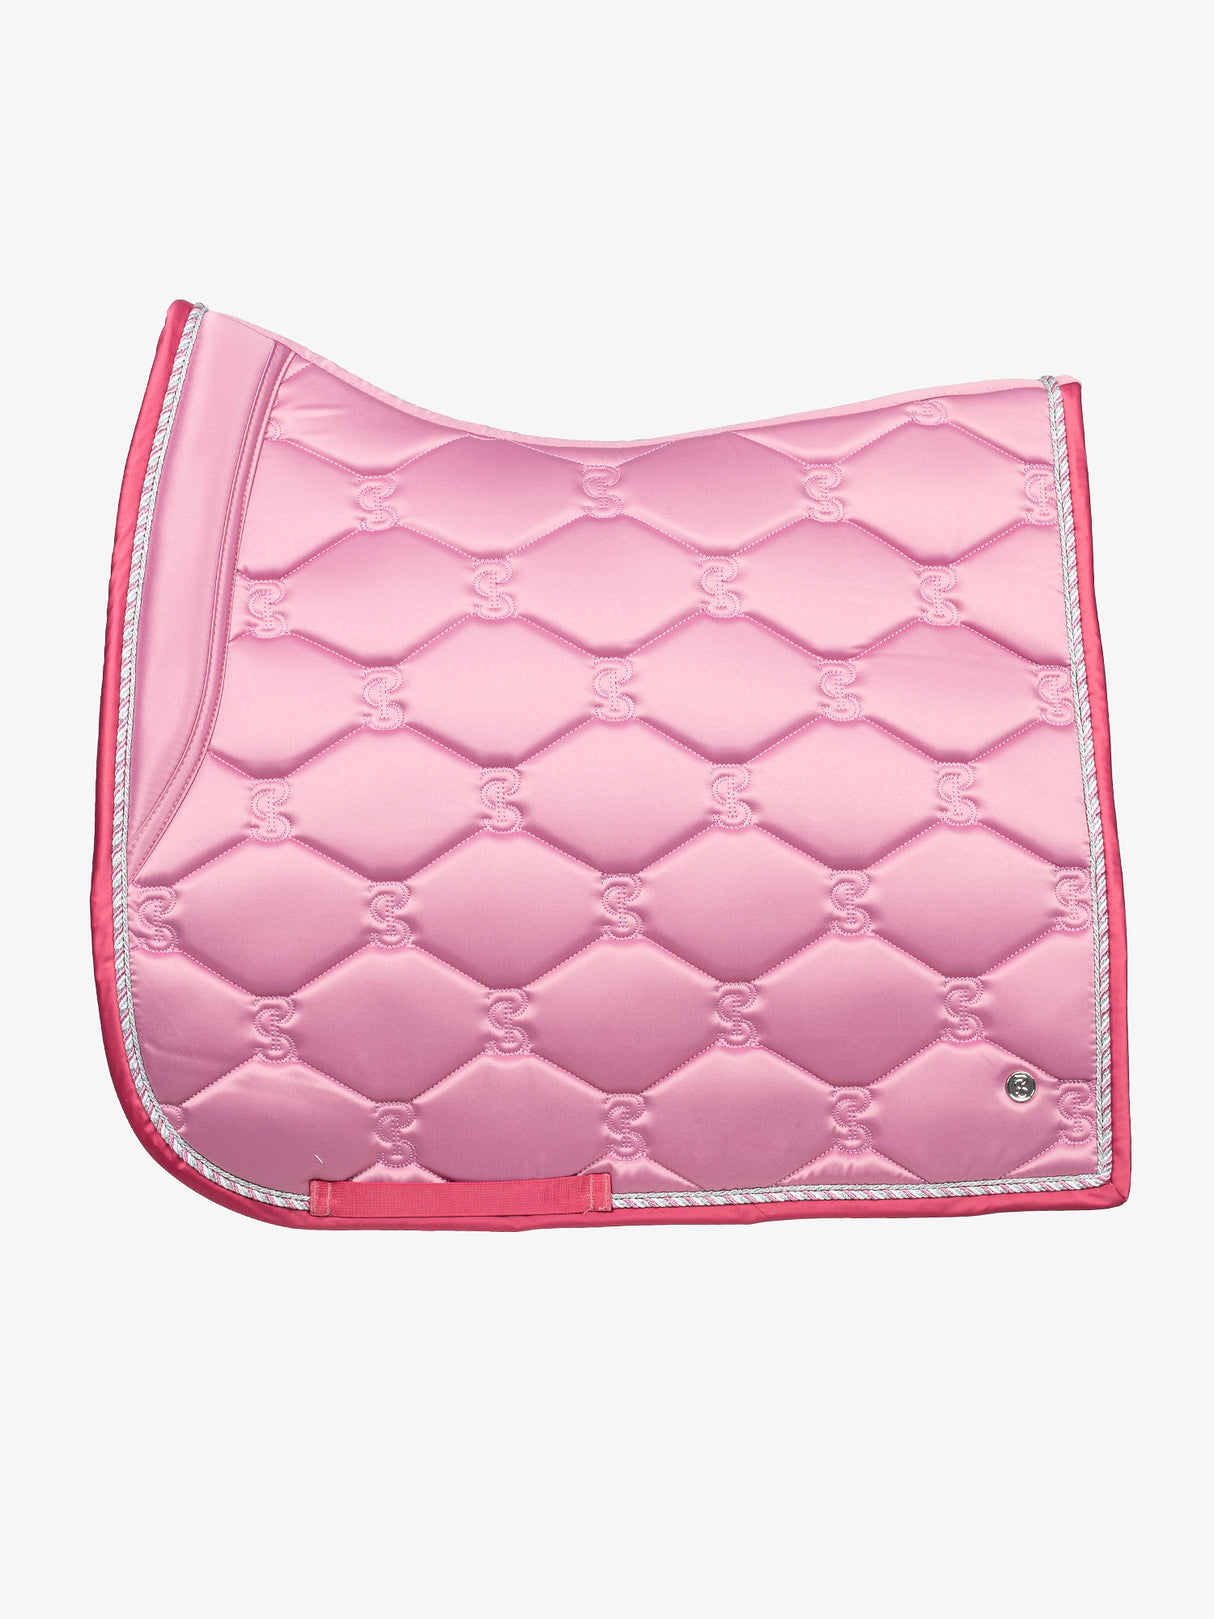 PS of Sweden Signature Dressage Saddle Pad Faded Rose